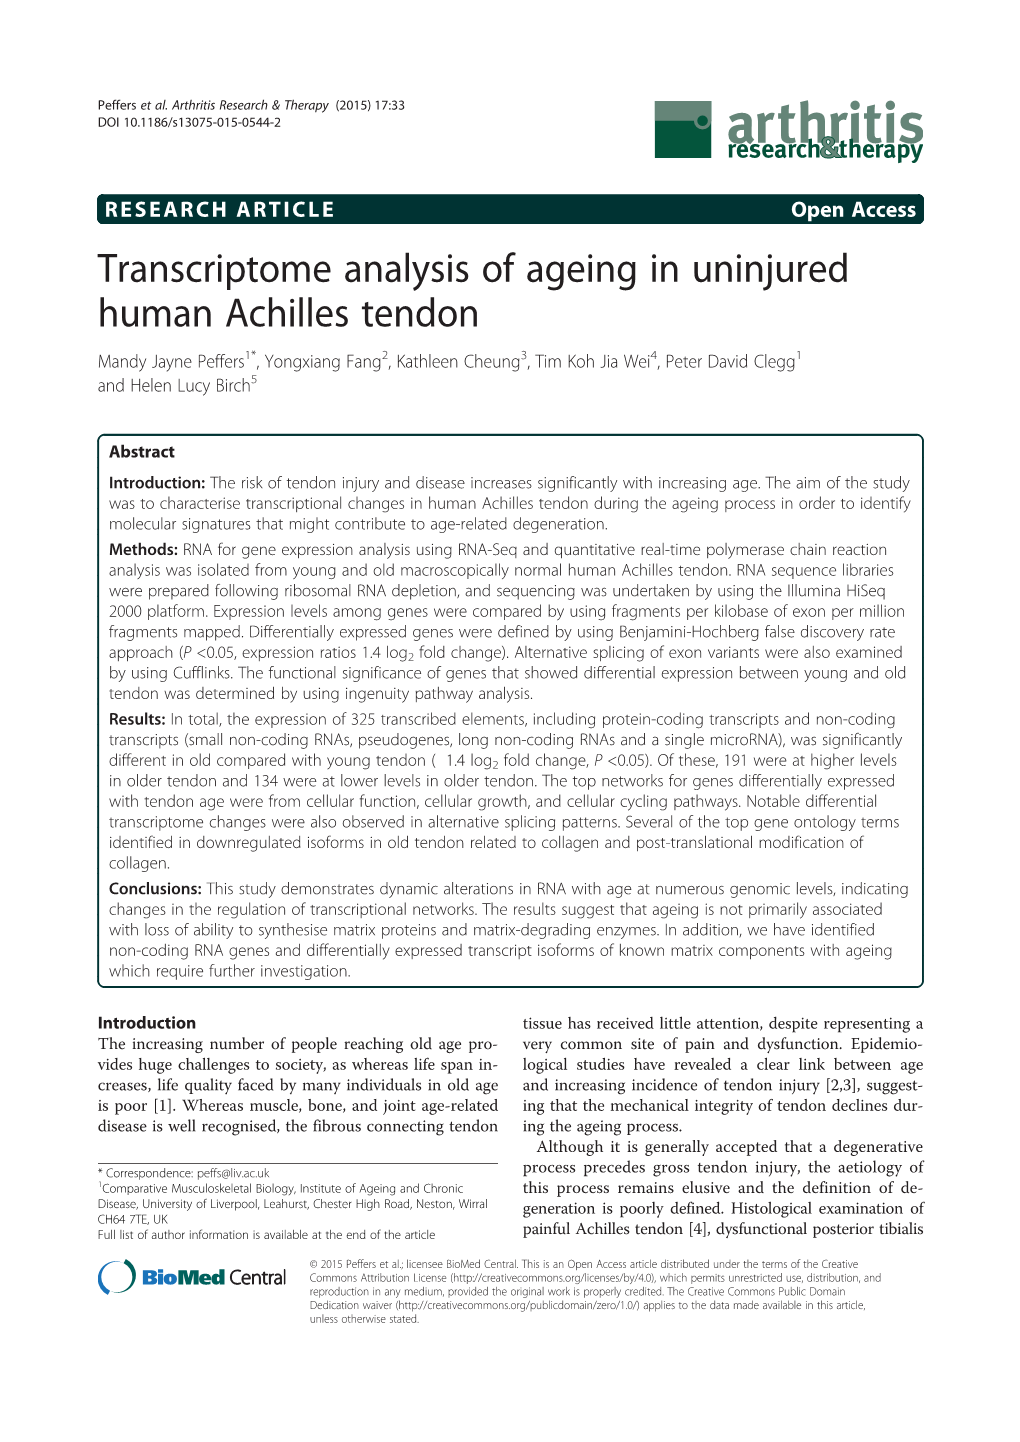 Transcriptome Analysis of Ageing in Uninjured Human Achilles Tendon